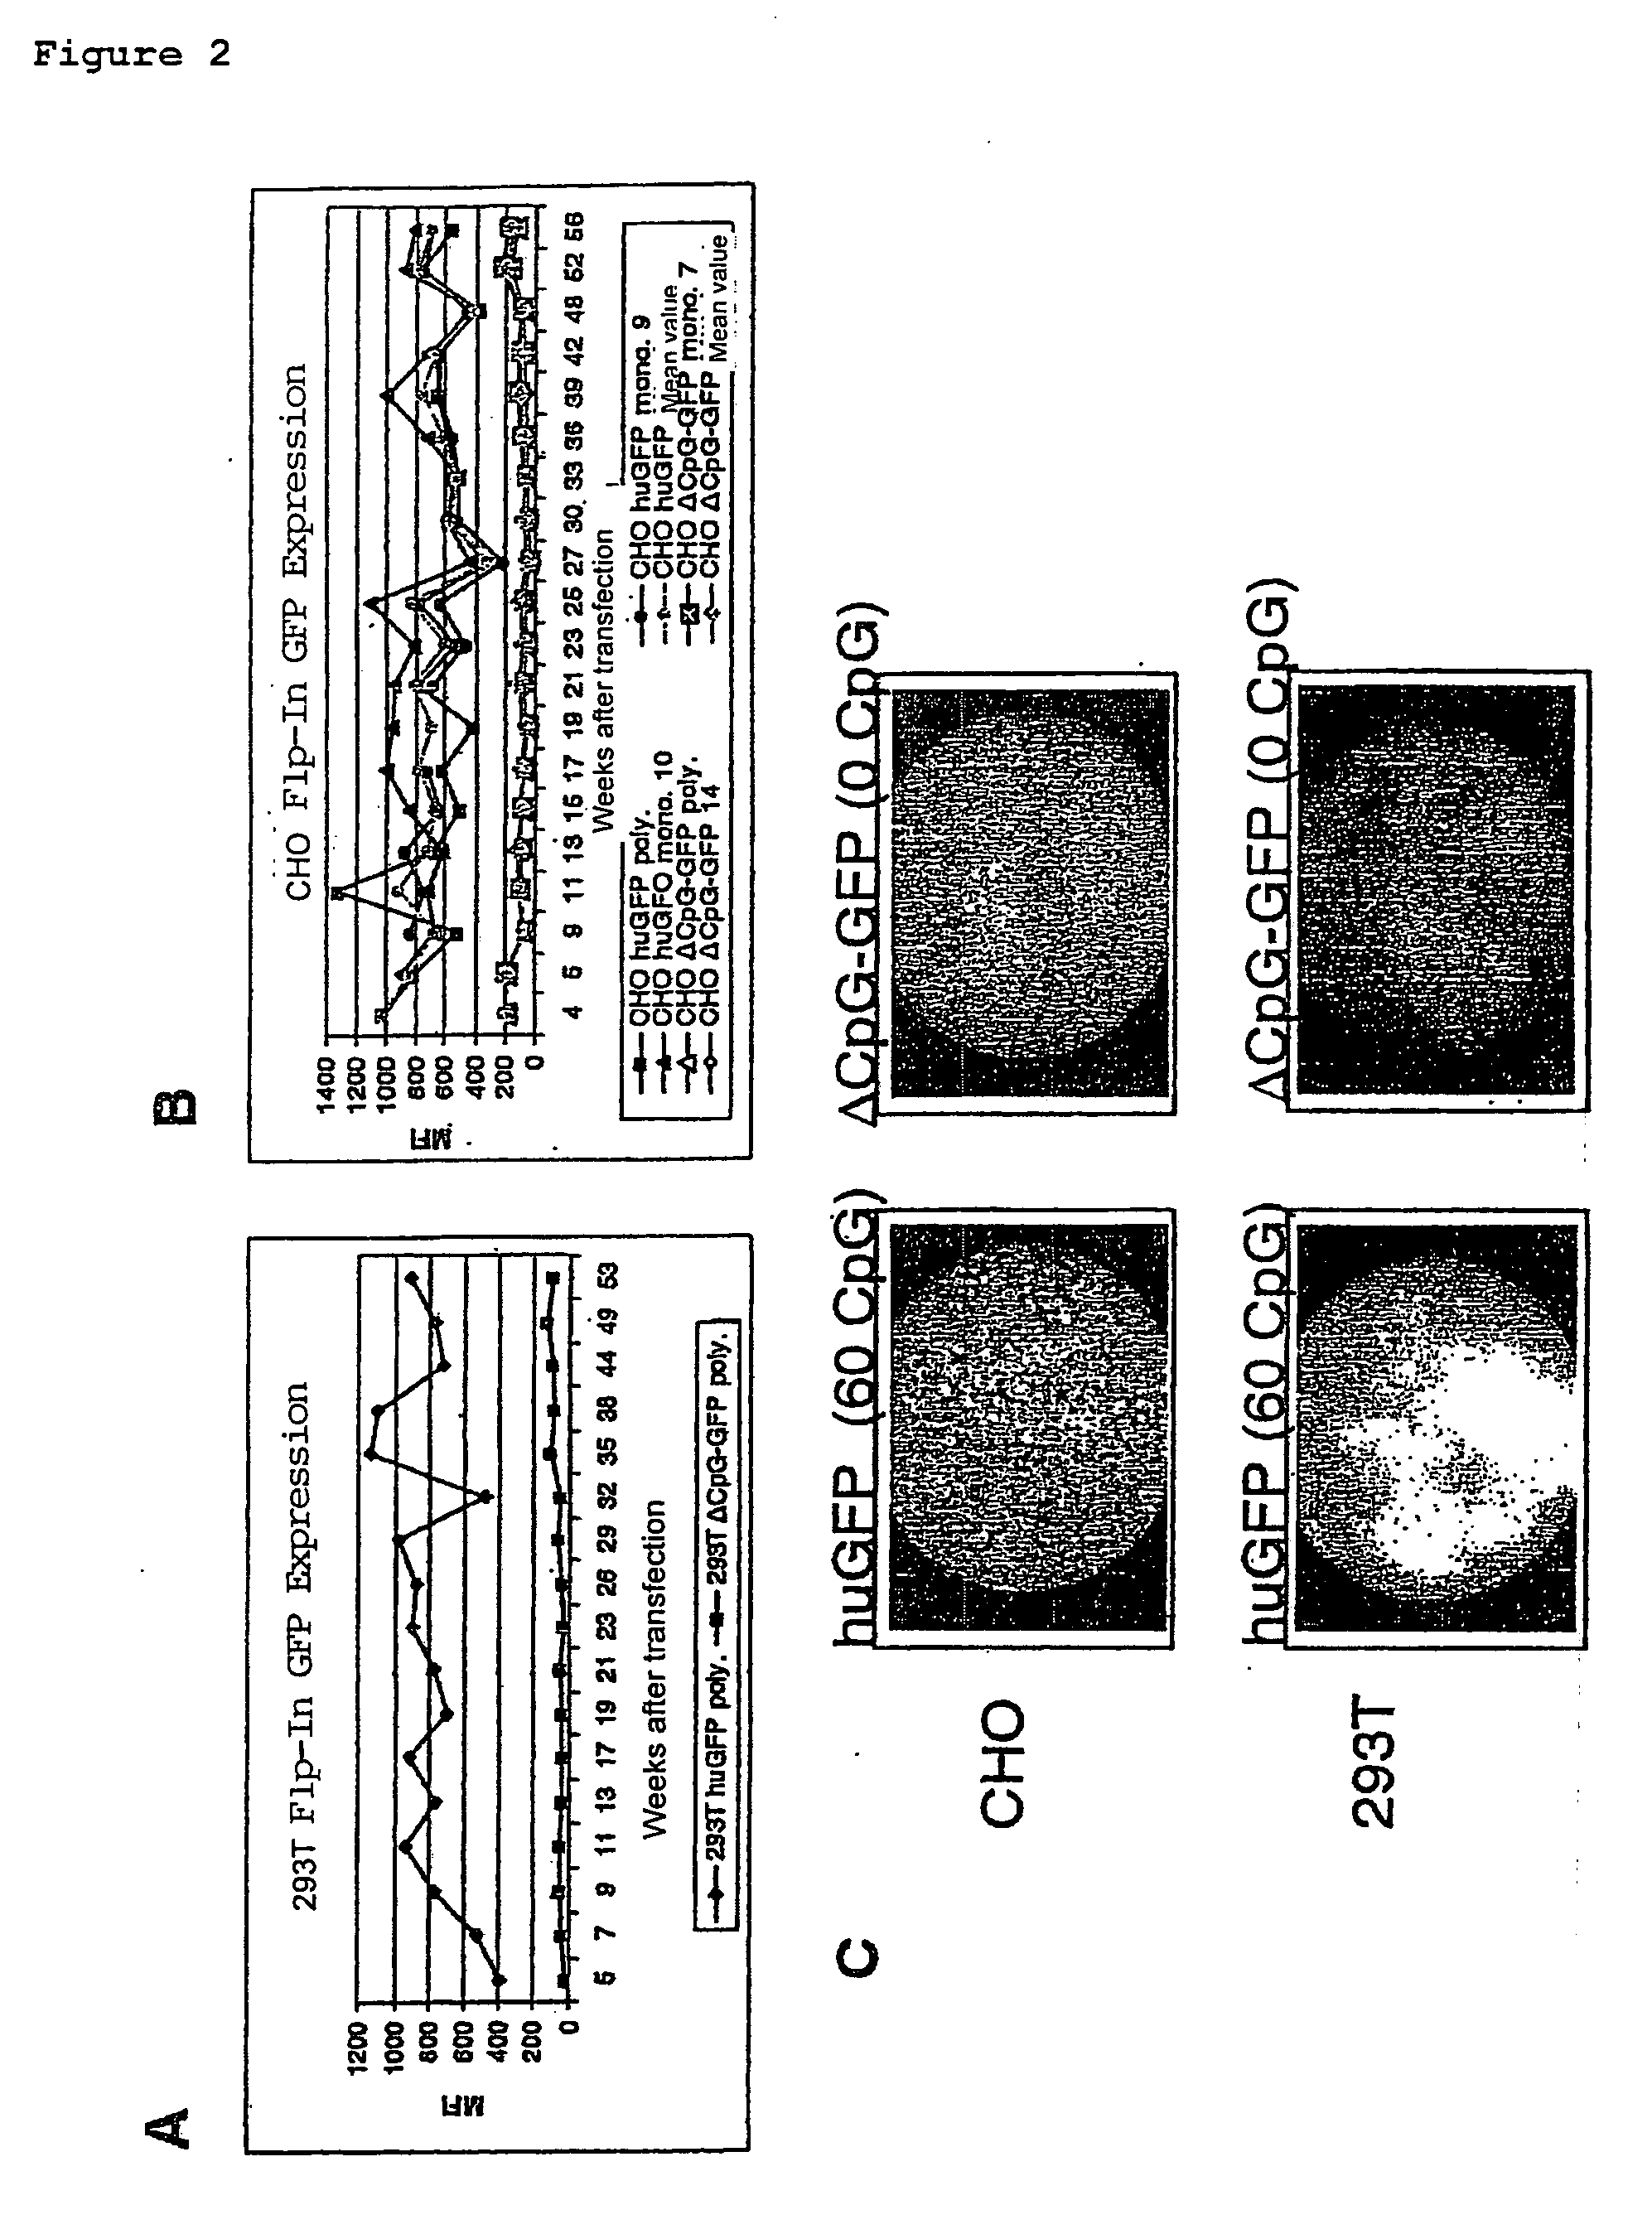 Method for modulating gene expression by modifying the cpg content